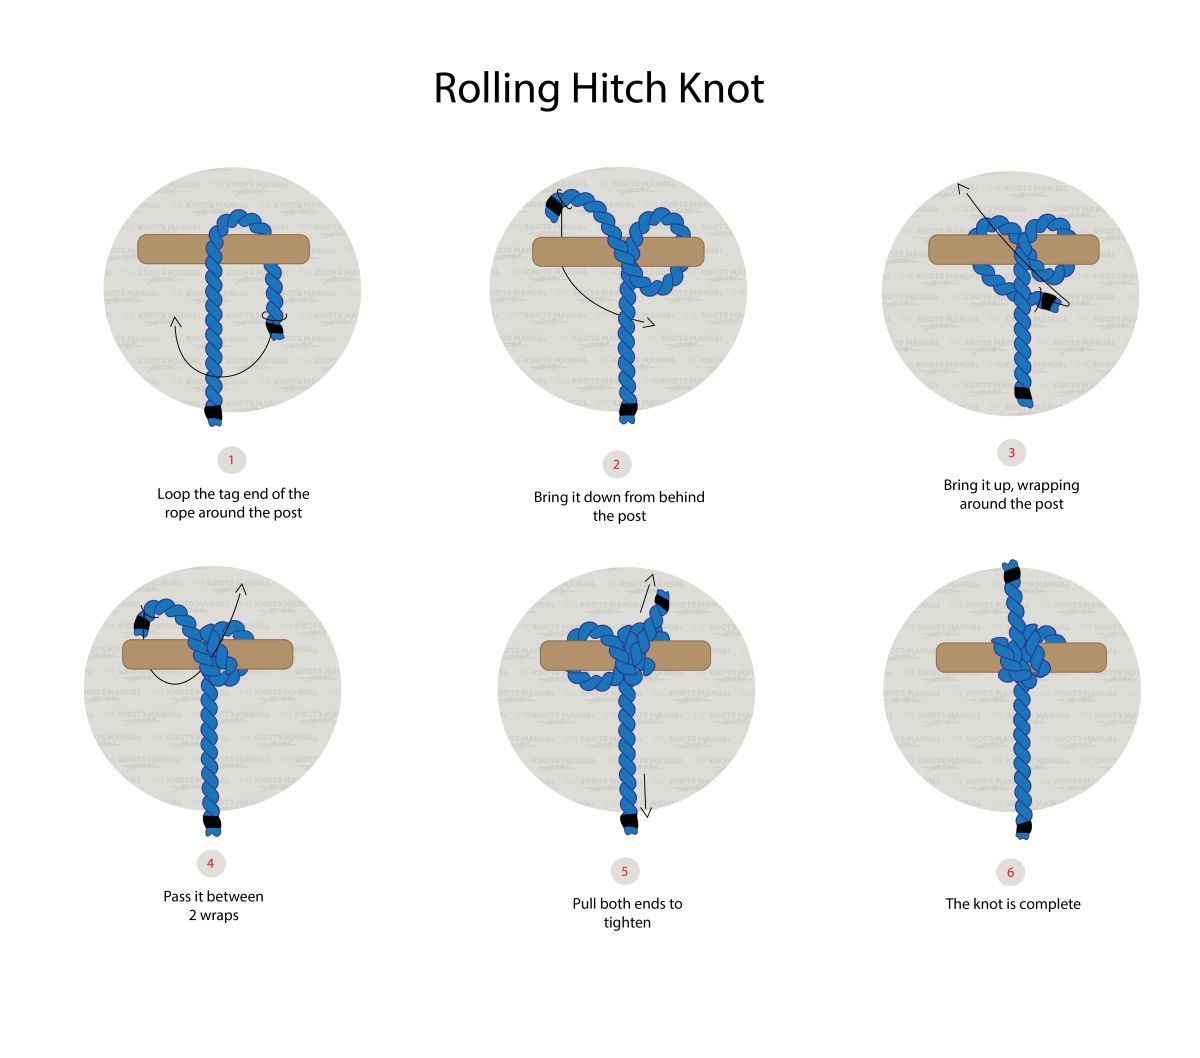 https://www.theknotsmanual.com/wp-content/uploads/hitch-knots/rolling-hitch-knot/The-Rolling-Hitch-Its-Uses-Step-By-Step-1.jpg